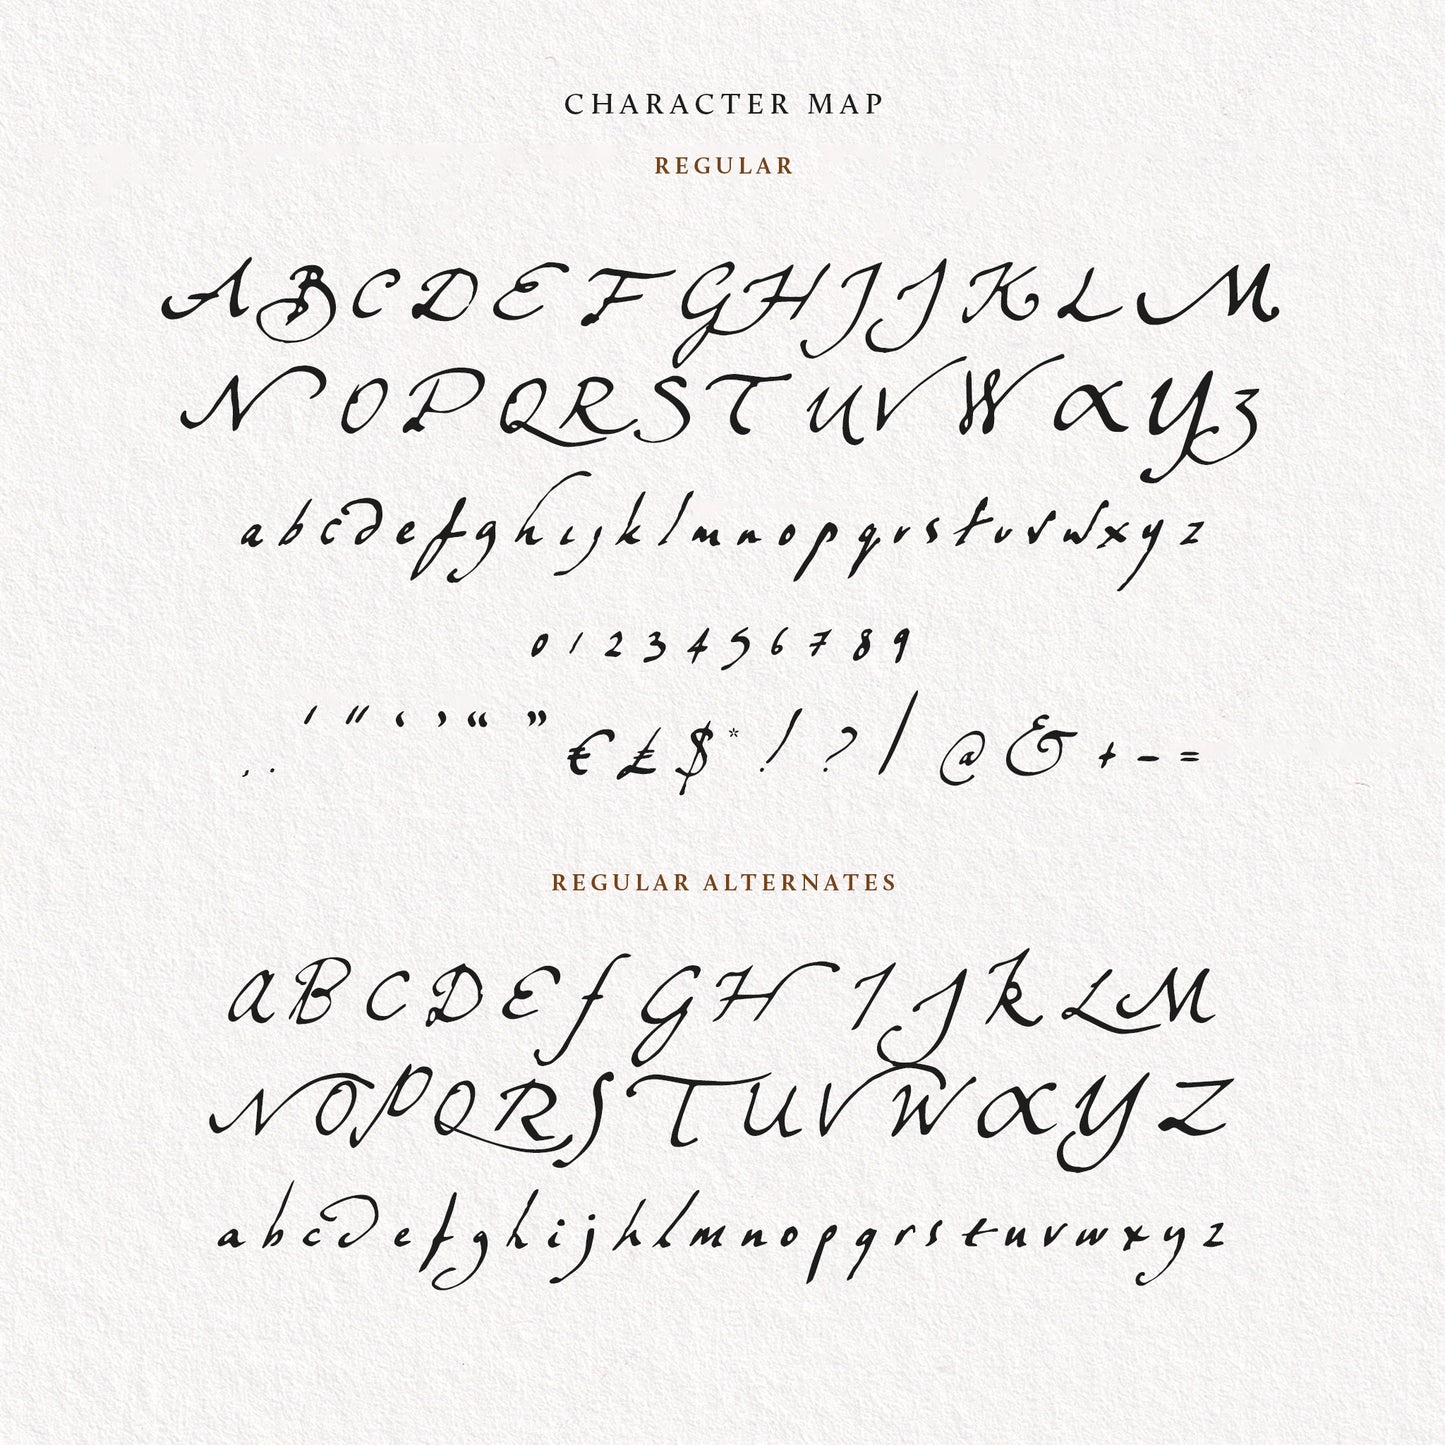 All characters of the Bliaunt script font on a paper background